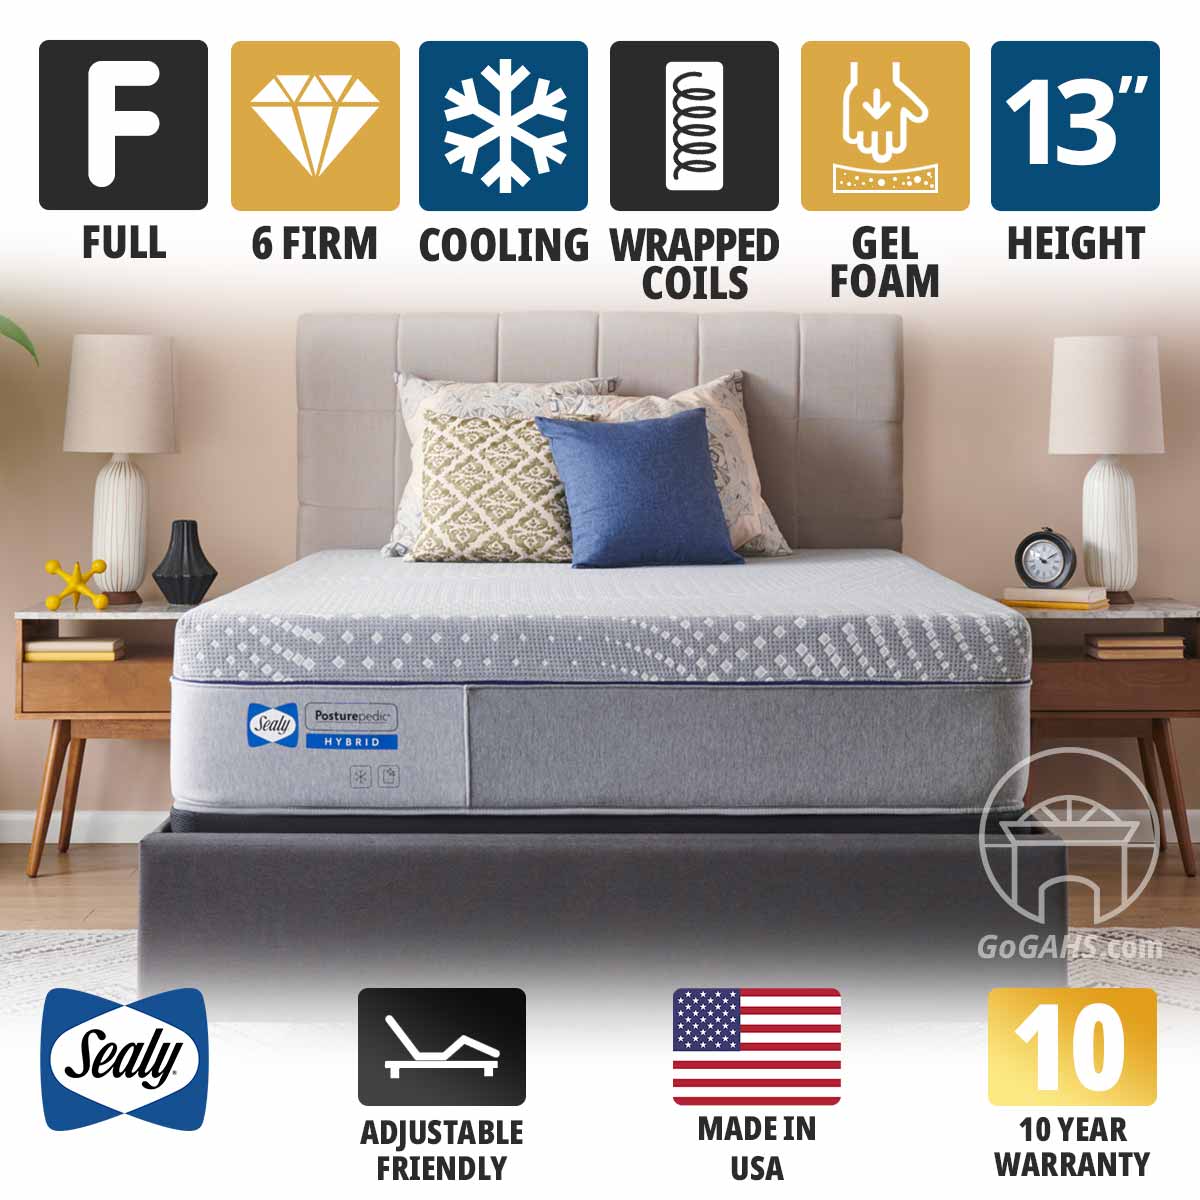 Full Sealy Posturepedic Hybrid Lacey 13" Firm Mattress